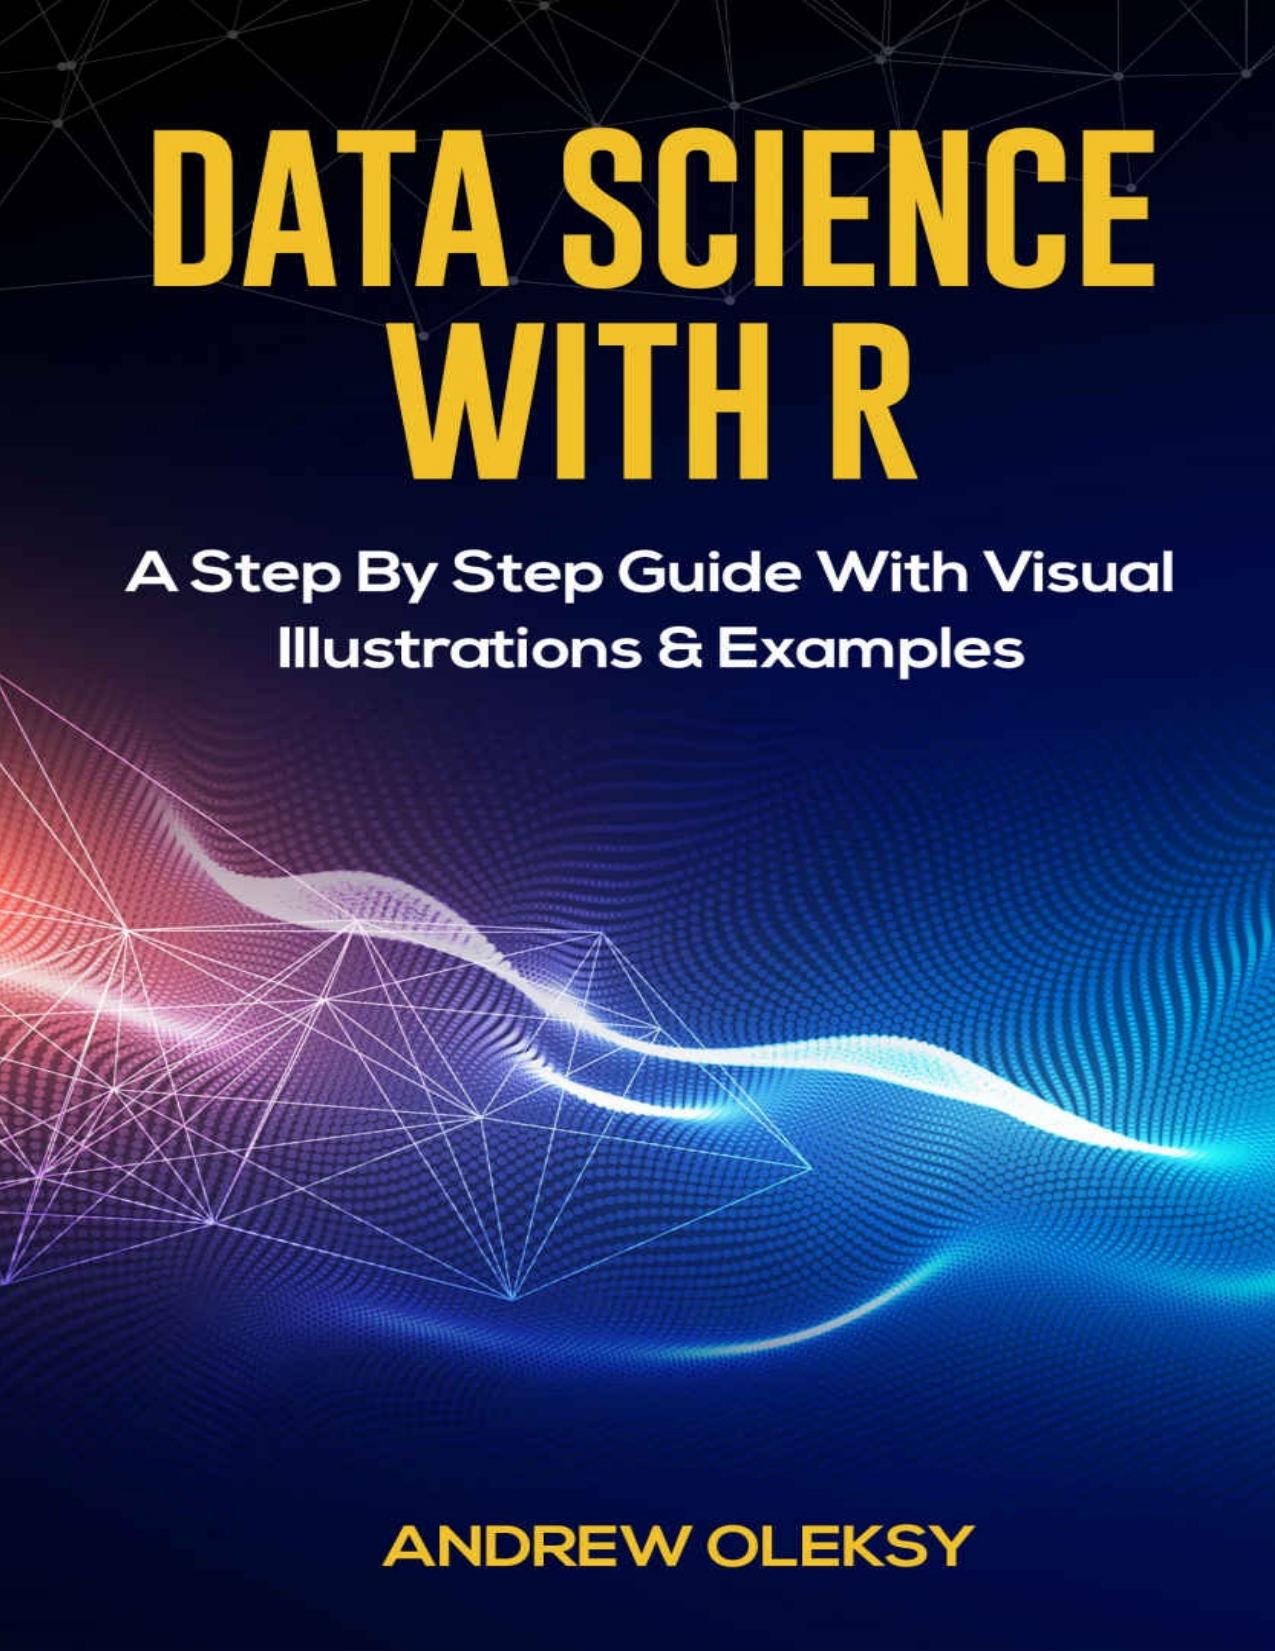 Data Science with R: A Step By Step Guide With Visual Illustrations & Examples